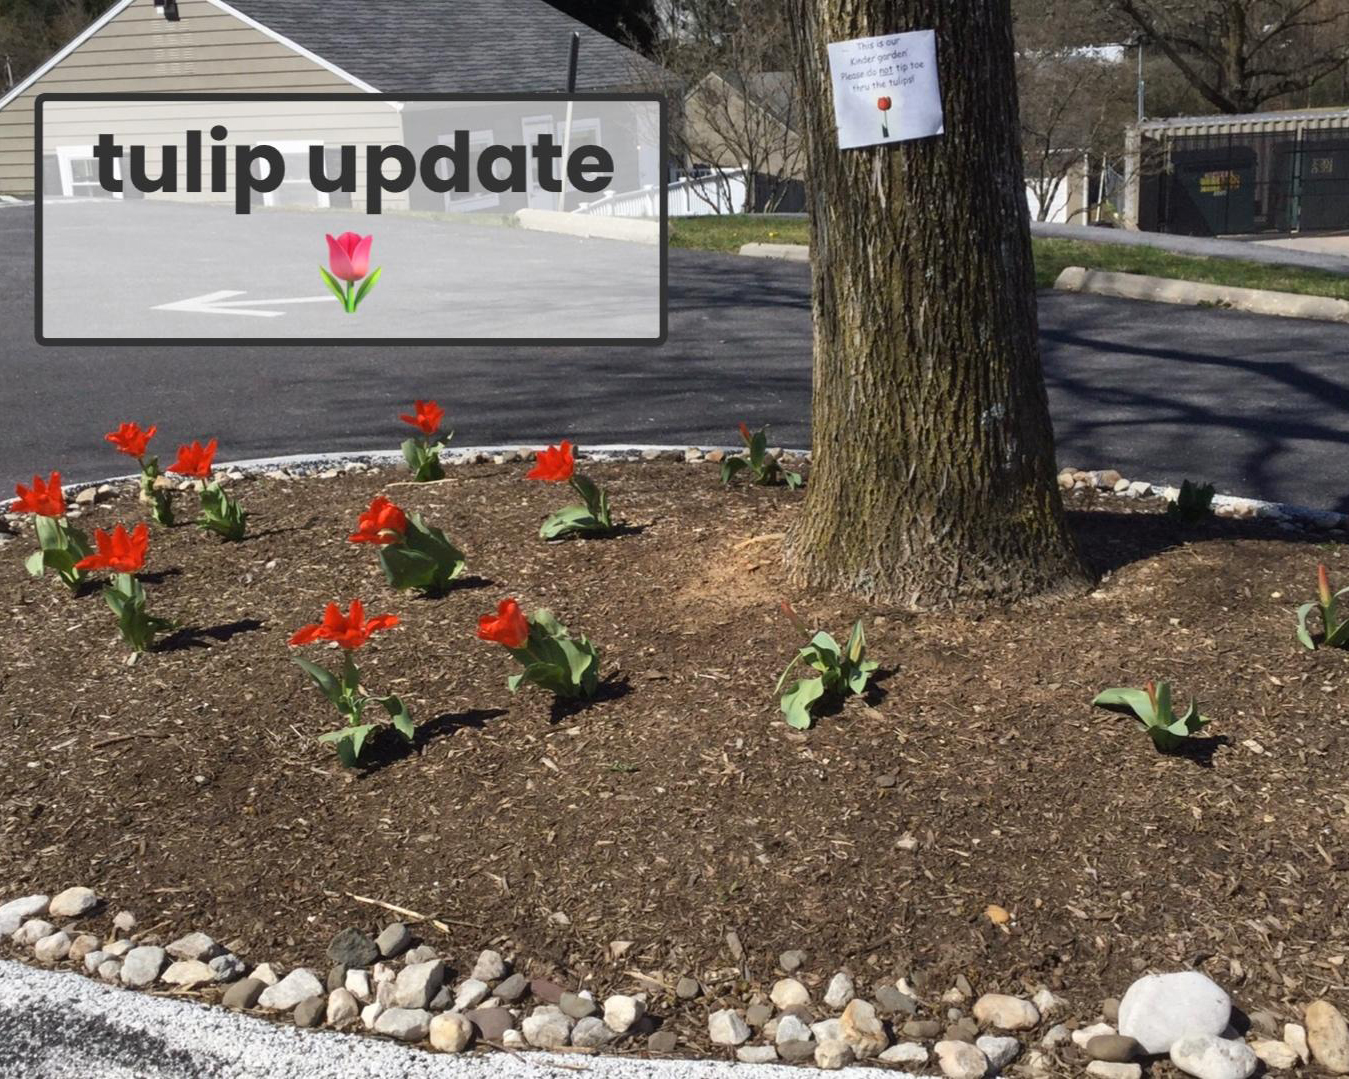 Tulips blooming at a school garden